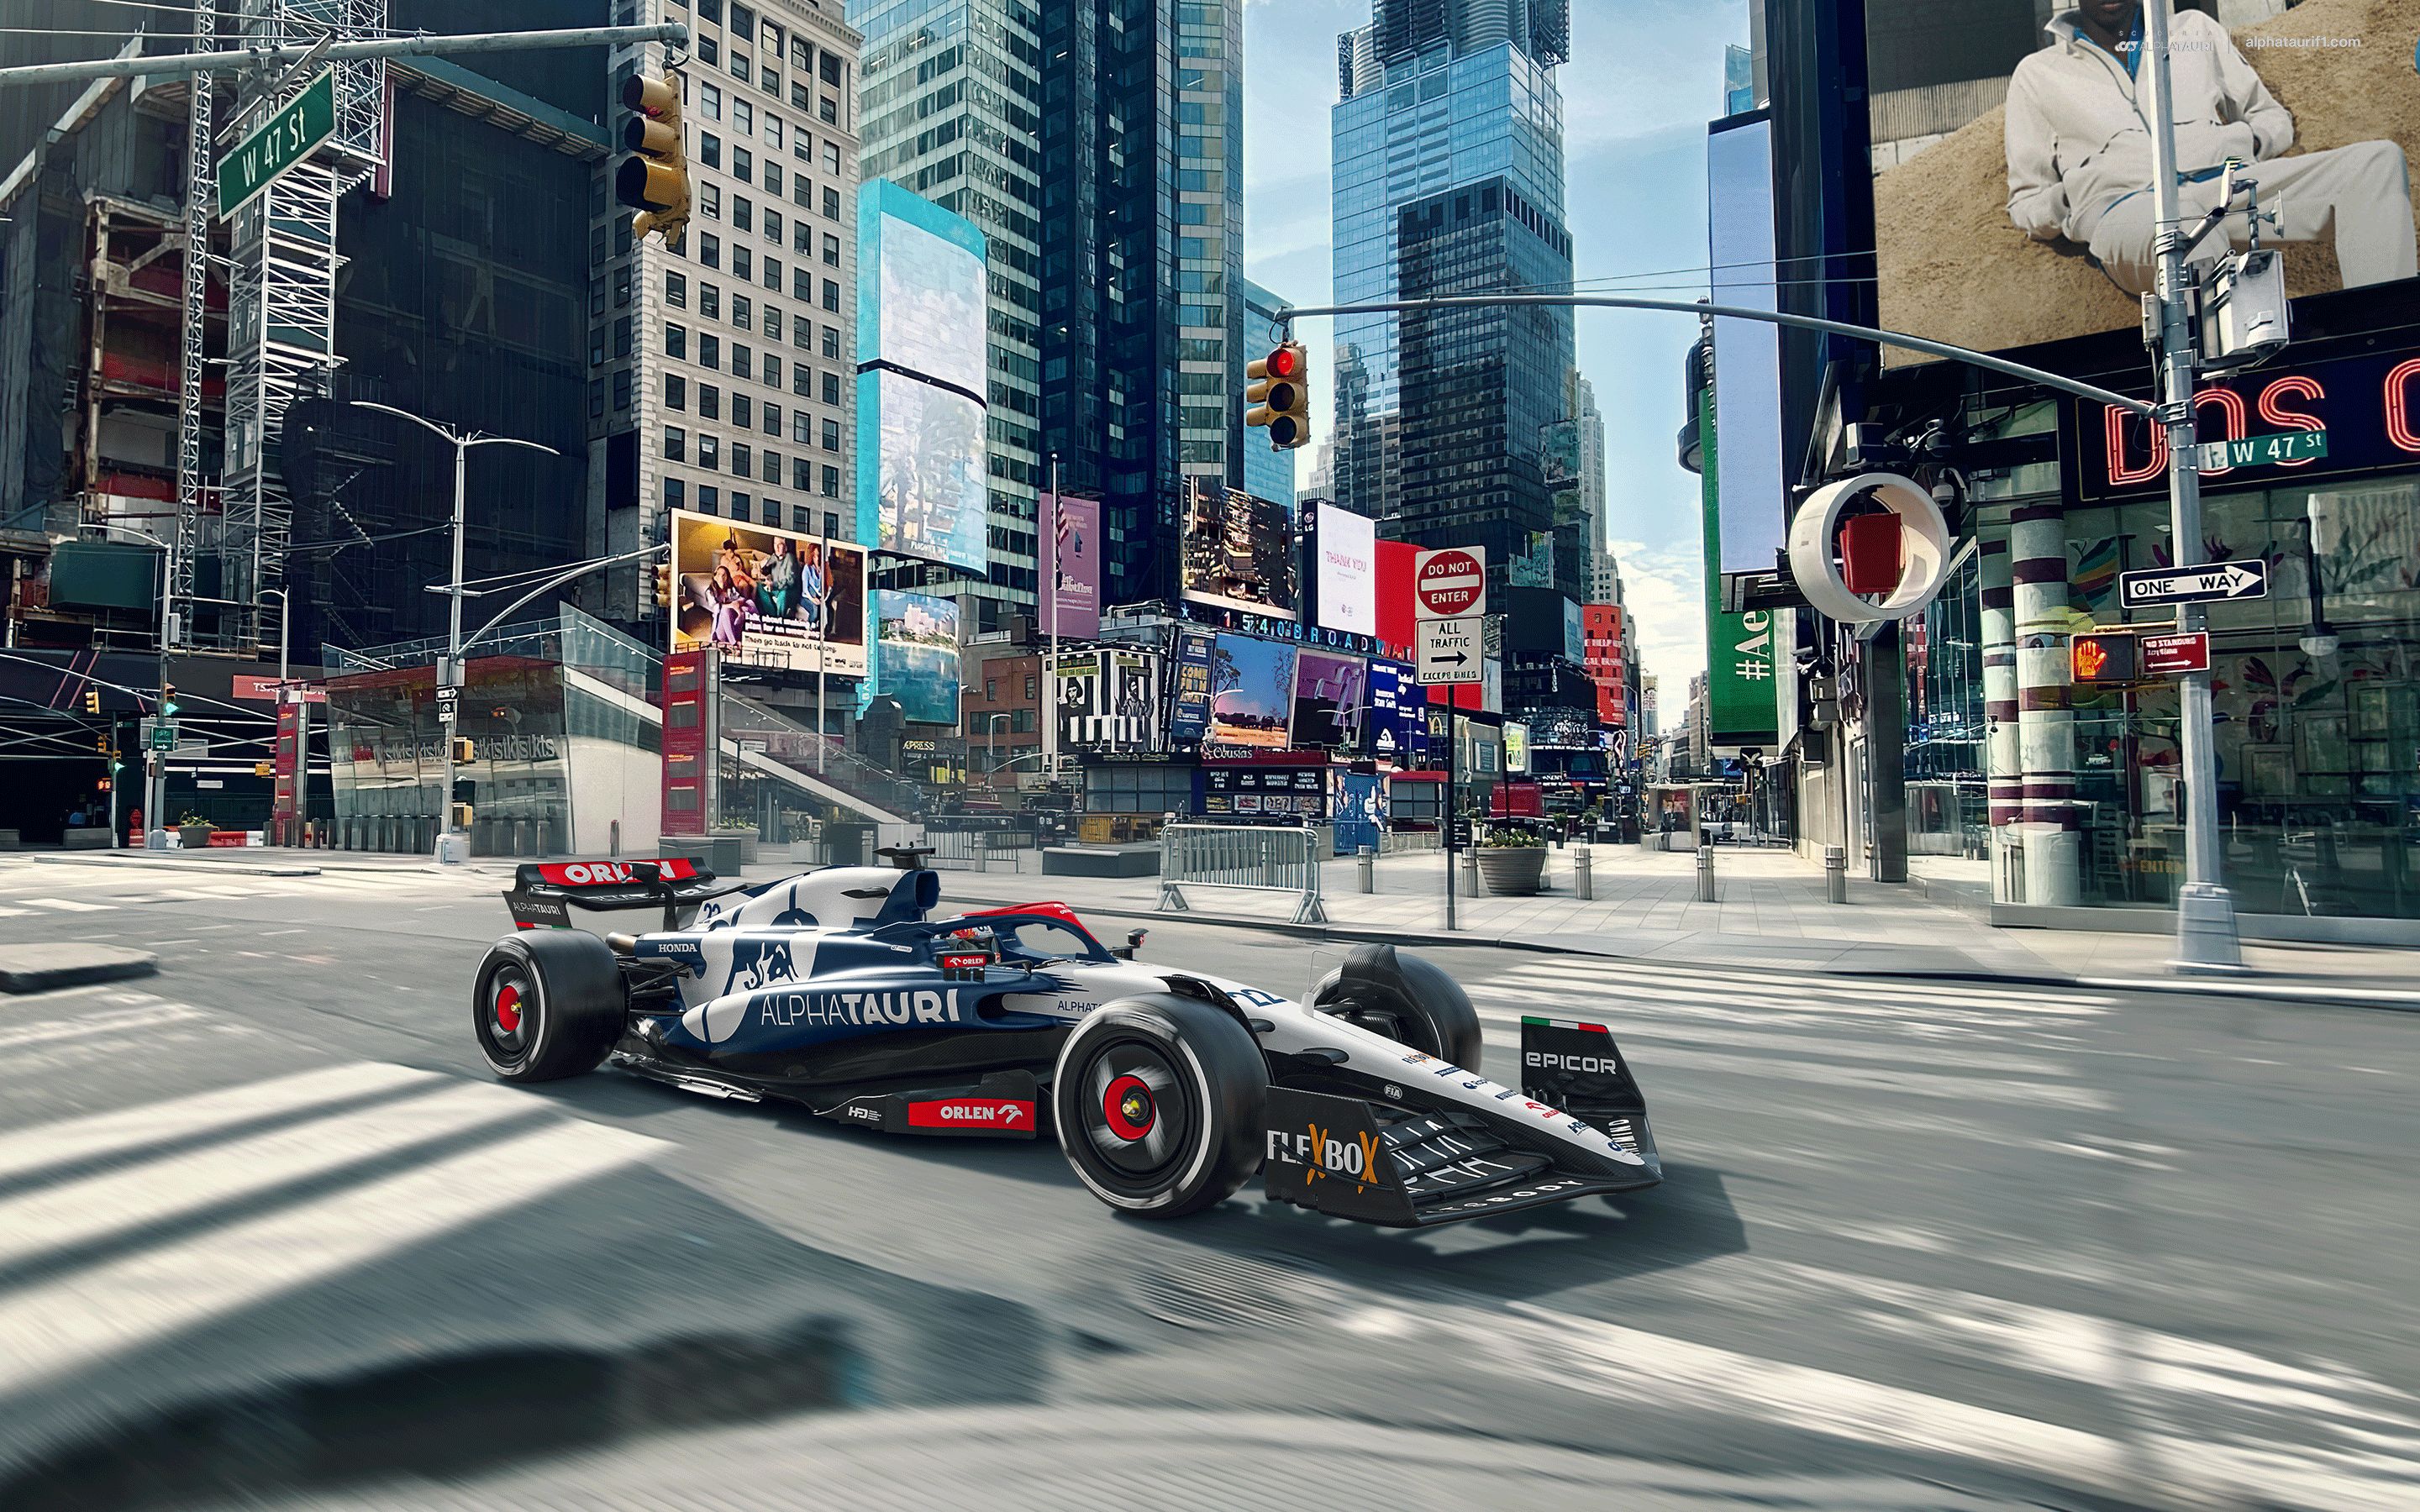 General 2880x1800 Formula 1 formula cars race cars Scuderia AlphaTauri New York City Times Square side view city building frontal view watermarked